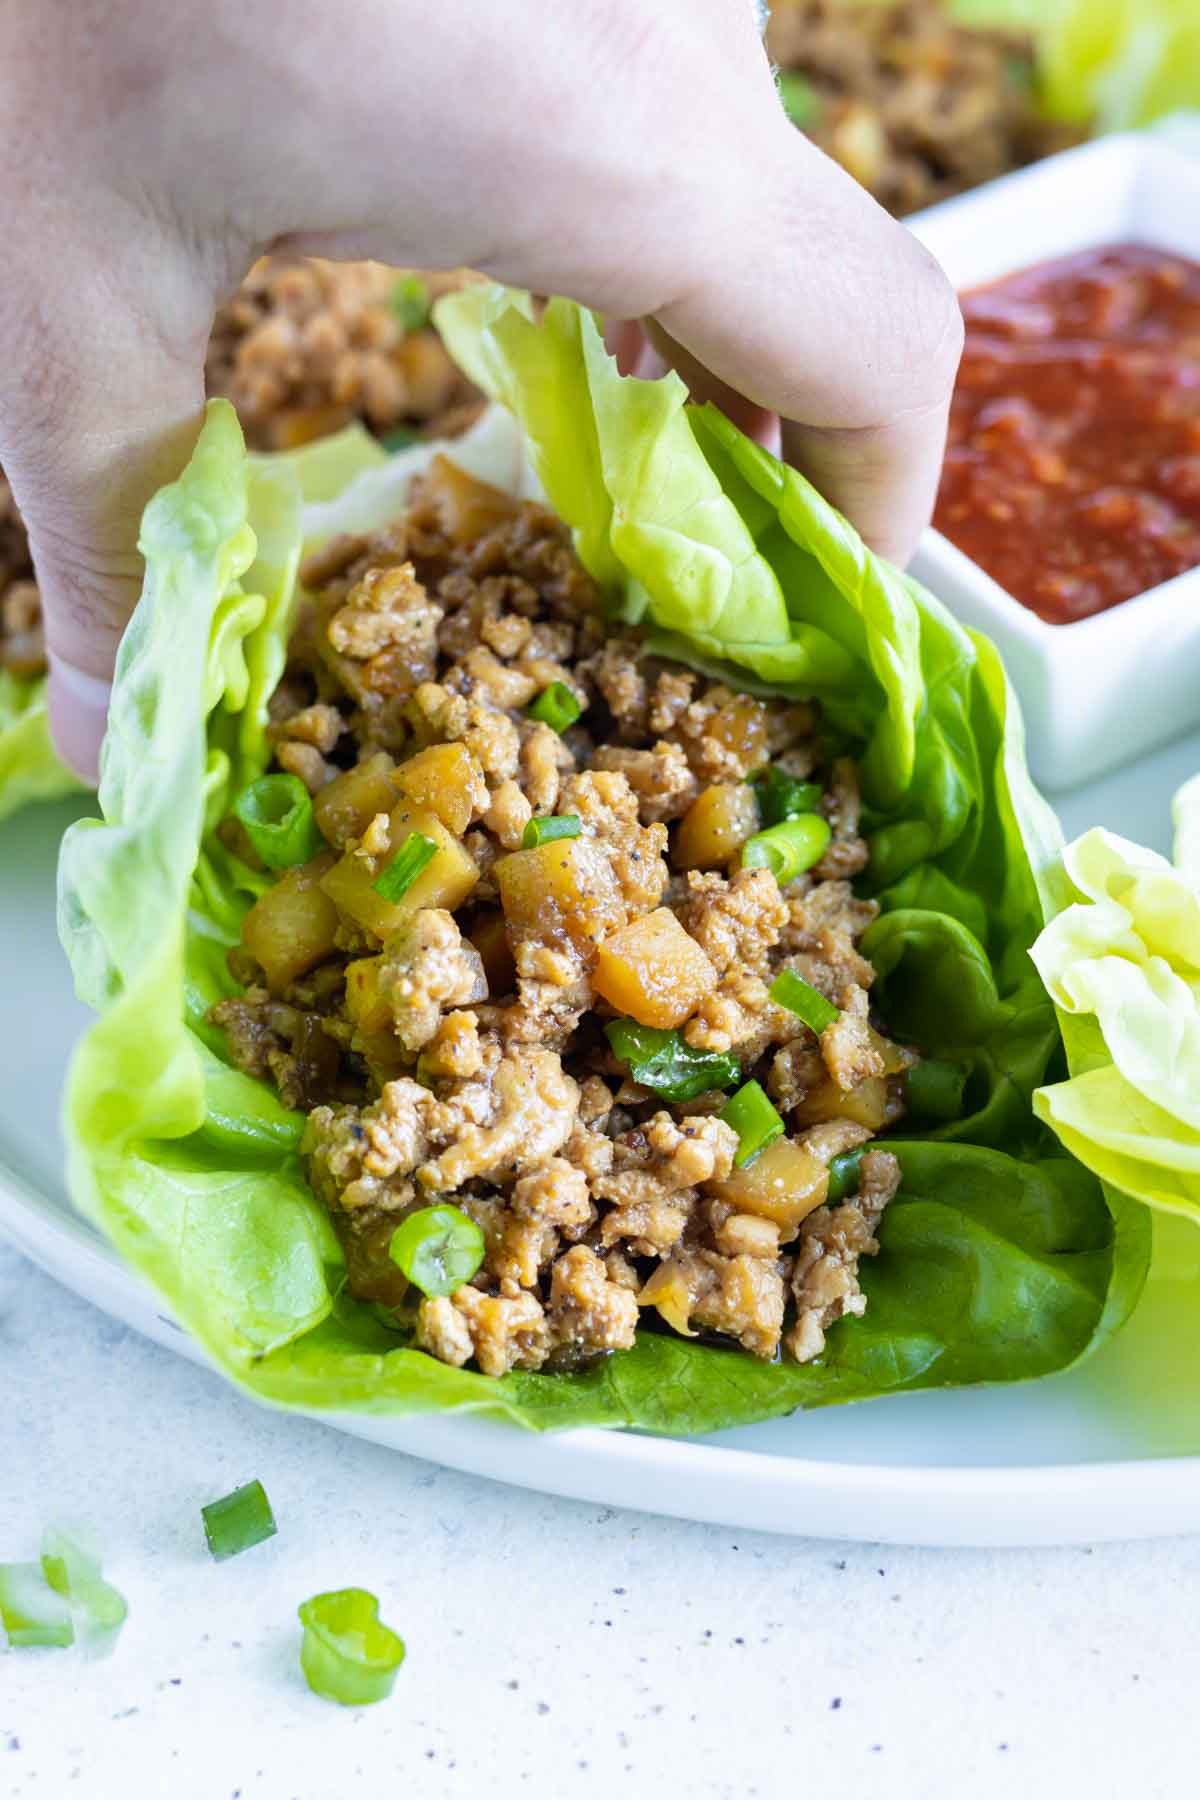 A hand is used to pick up the lettuce wrap from the plate.